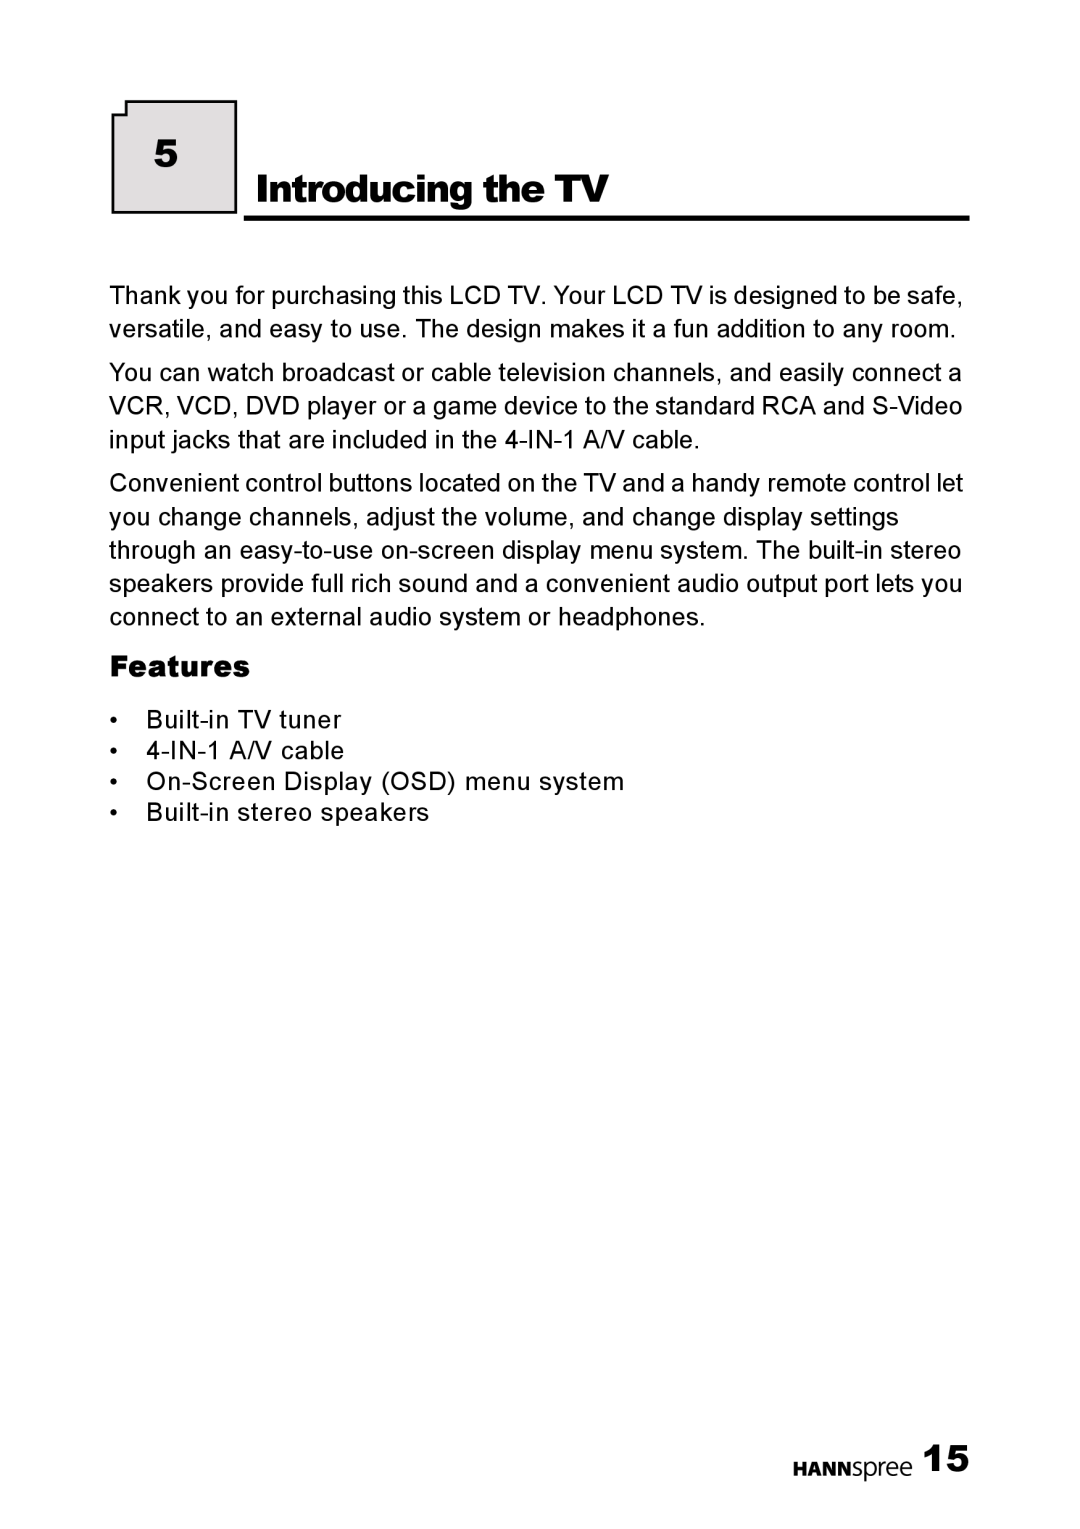 HANNspree HANNSz.crab user manual Introducing the TV, Features 